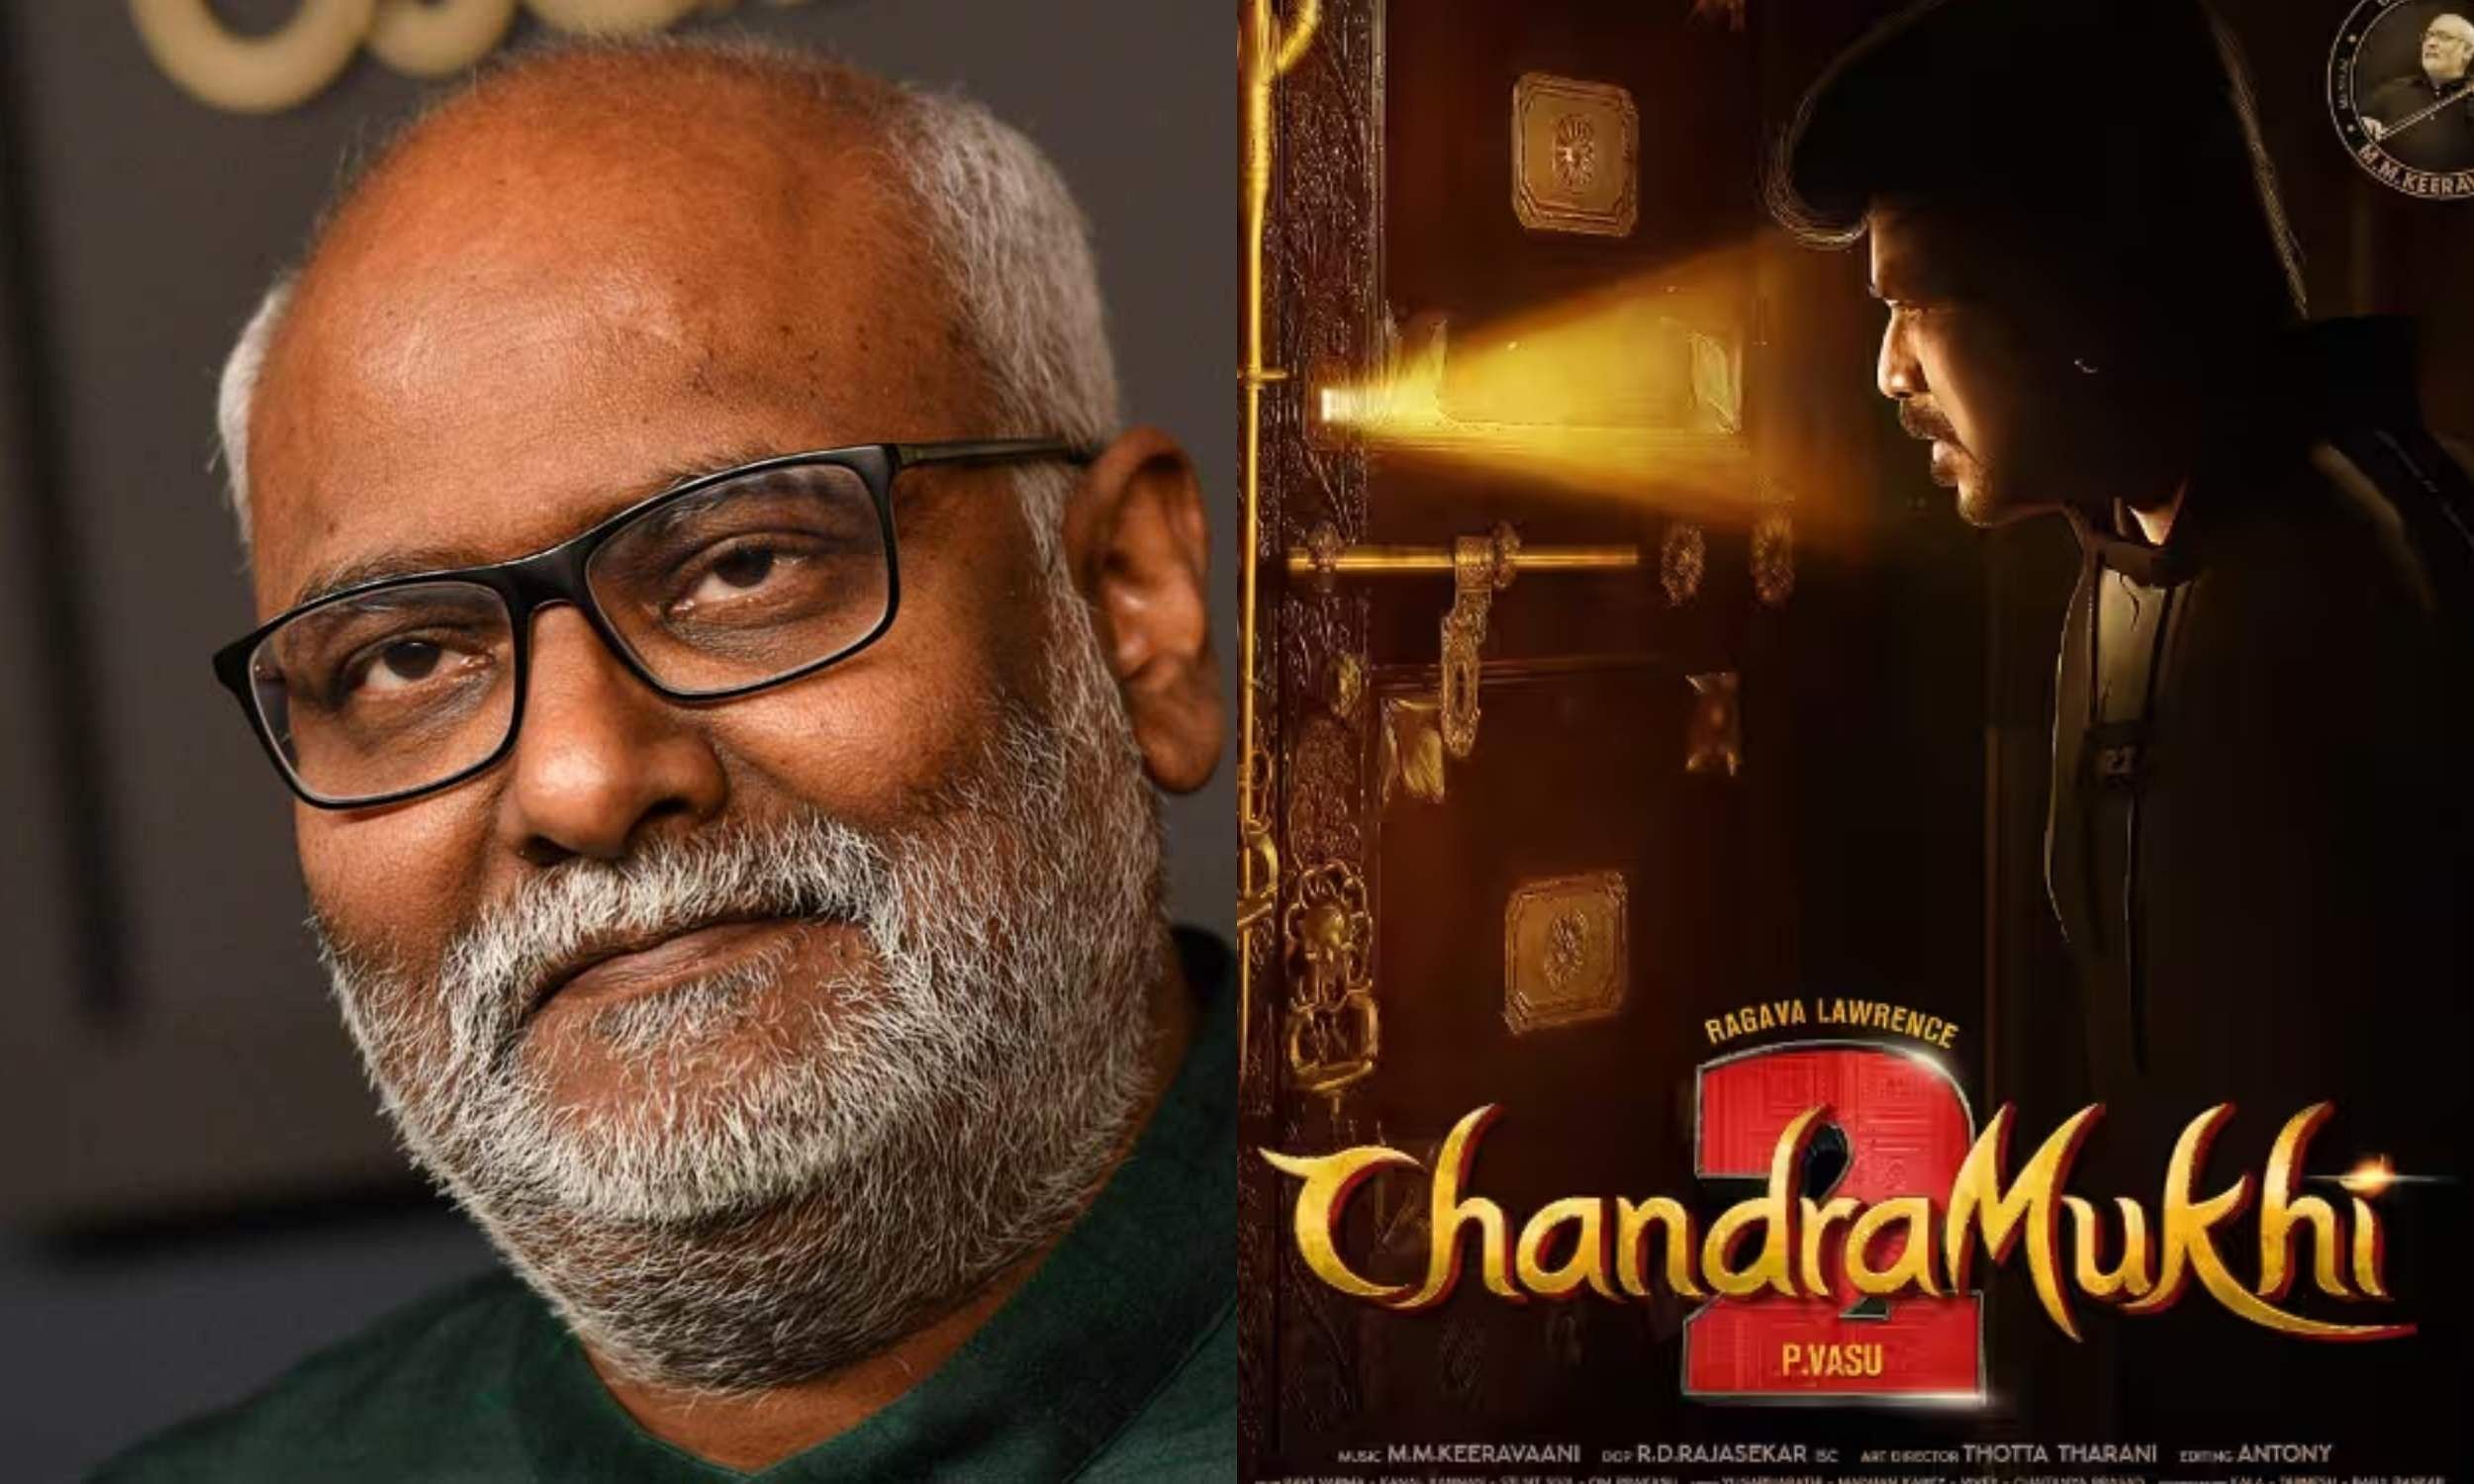 MM Keeravaani spent 2 months of sleepless nights composing for Chandramukhi 2